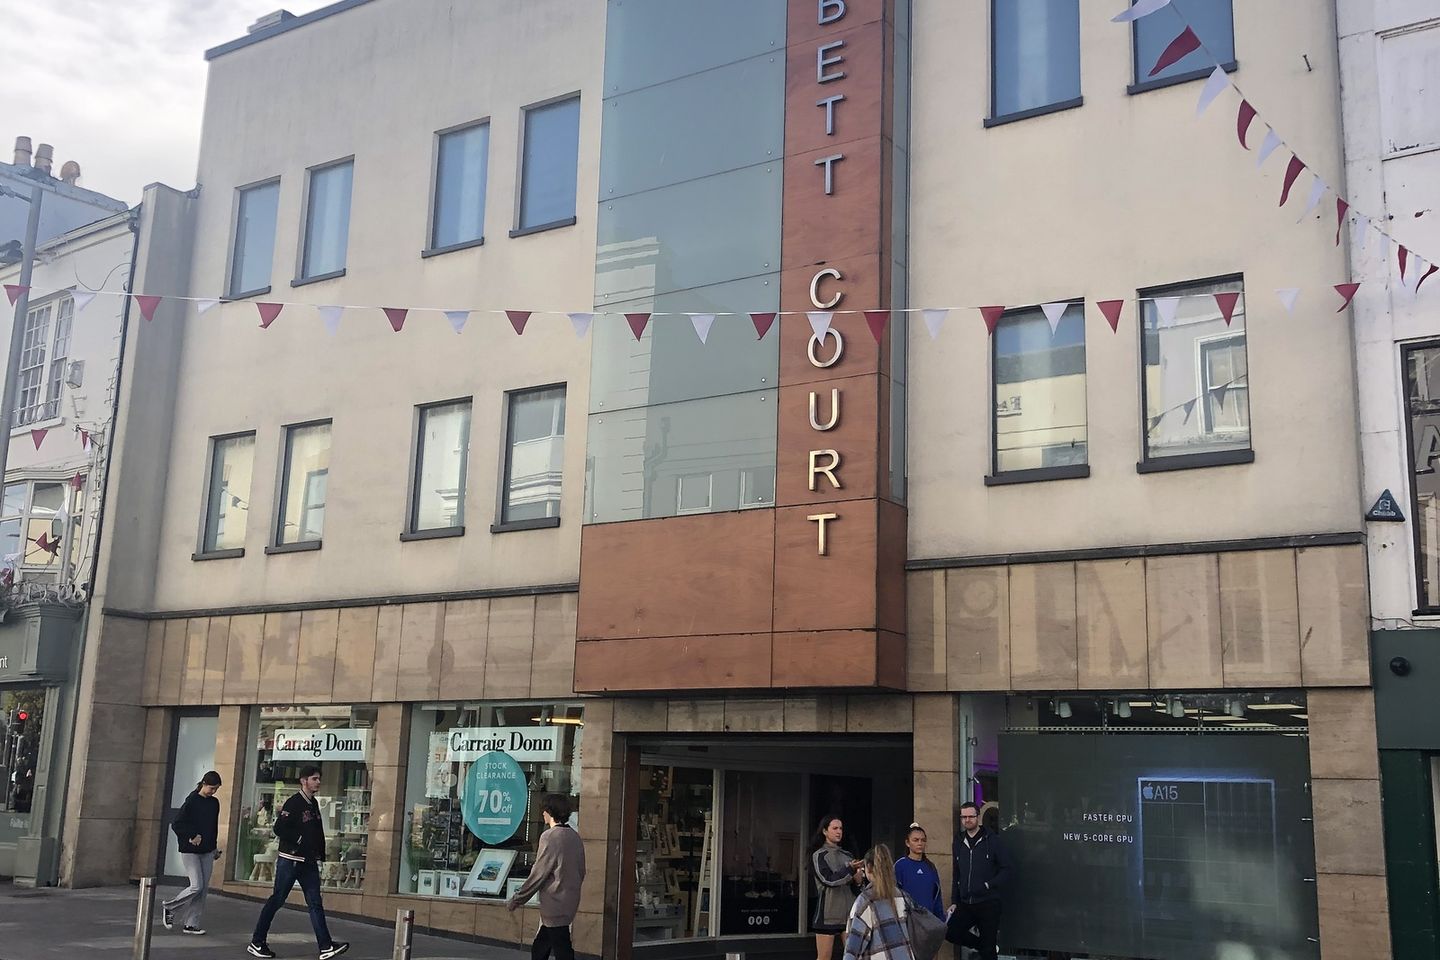 Pop Up Shops - Corbett Court Shopping Centre, Galway City, Co. Galway